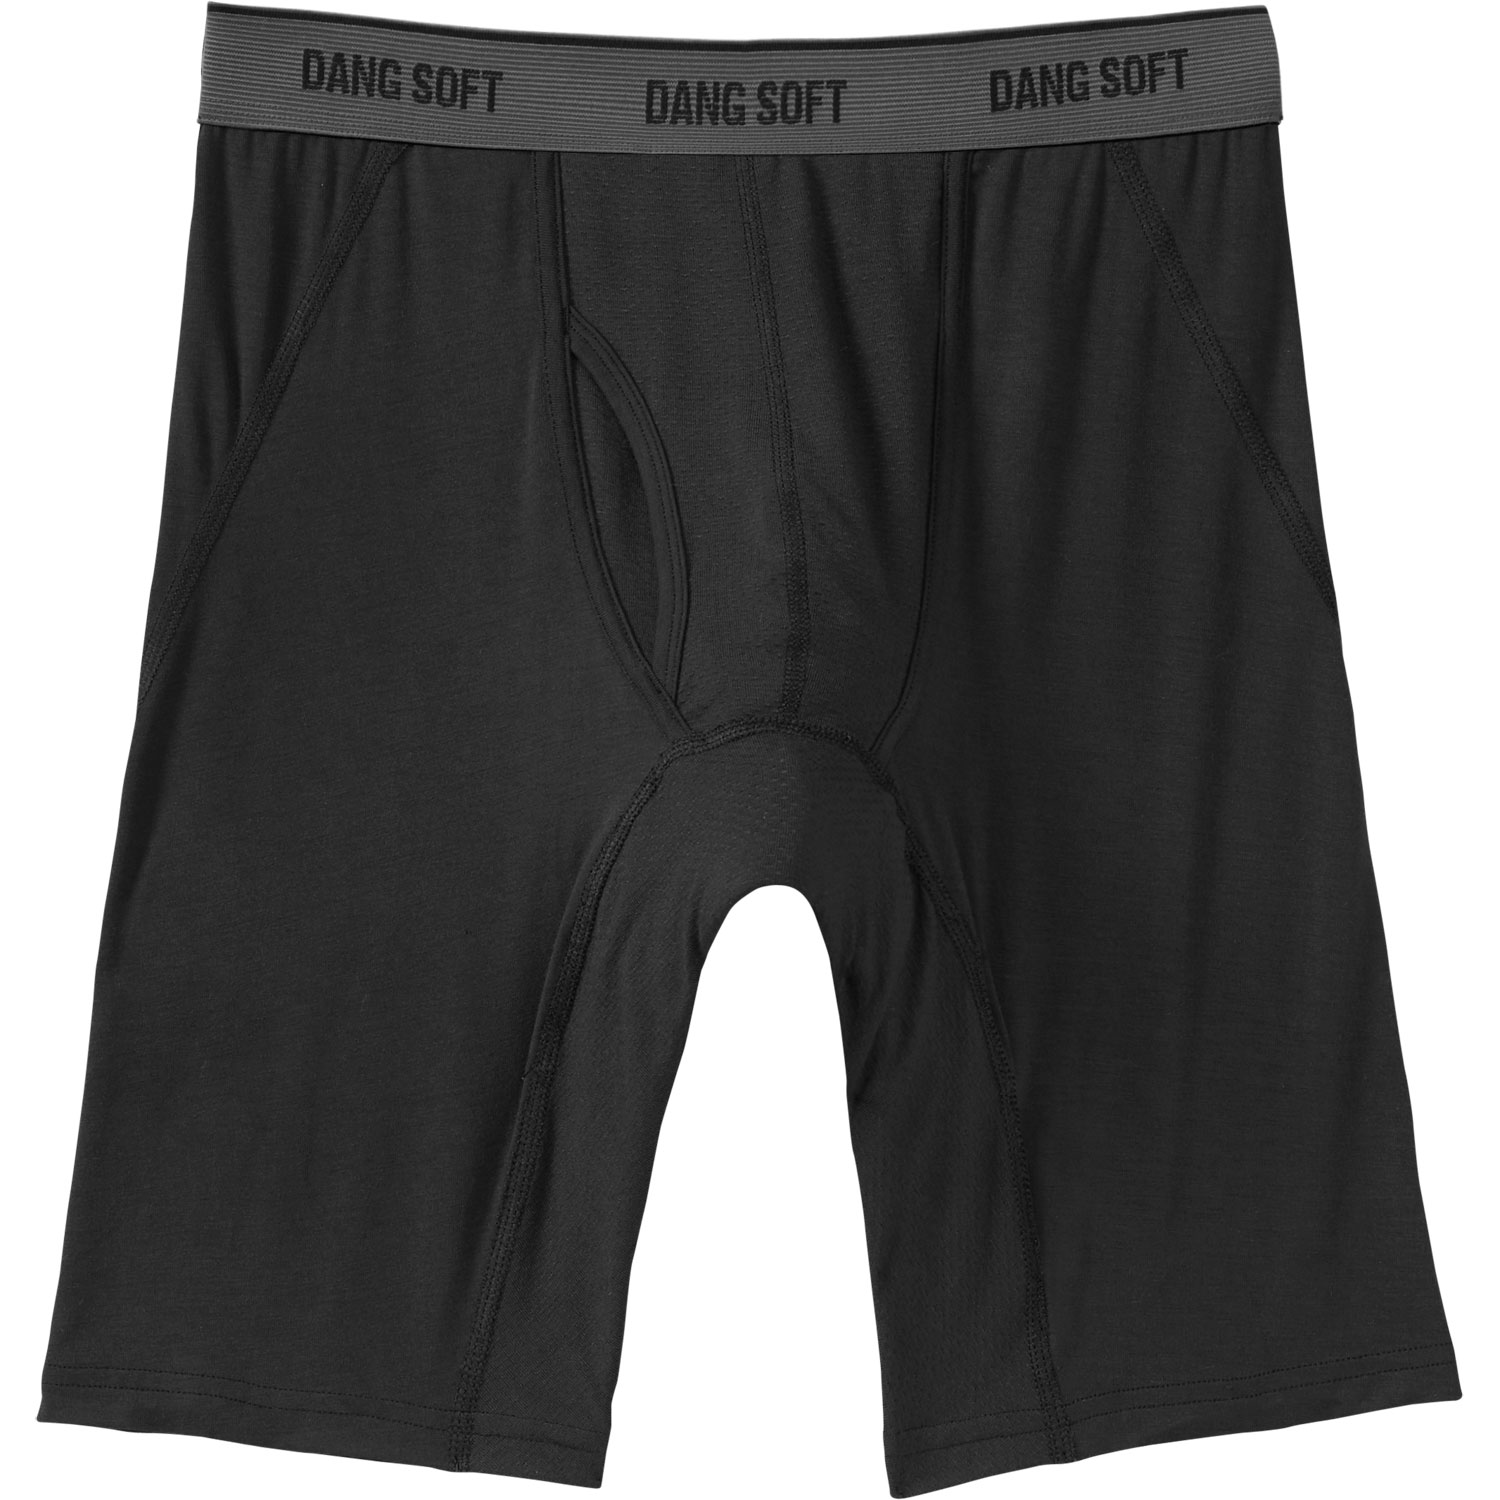 Boxer briefs black, experience the comfort of Tencel Micro Modal